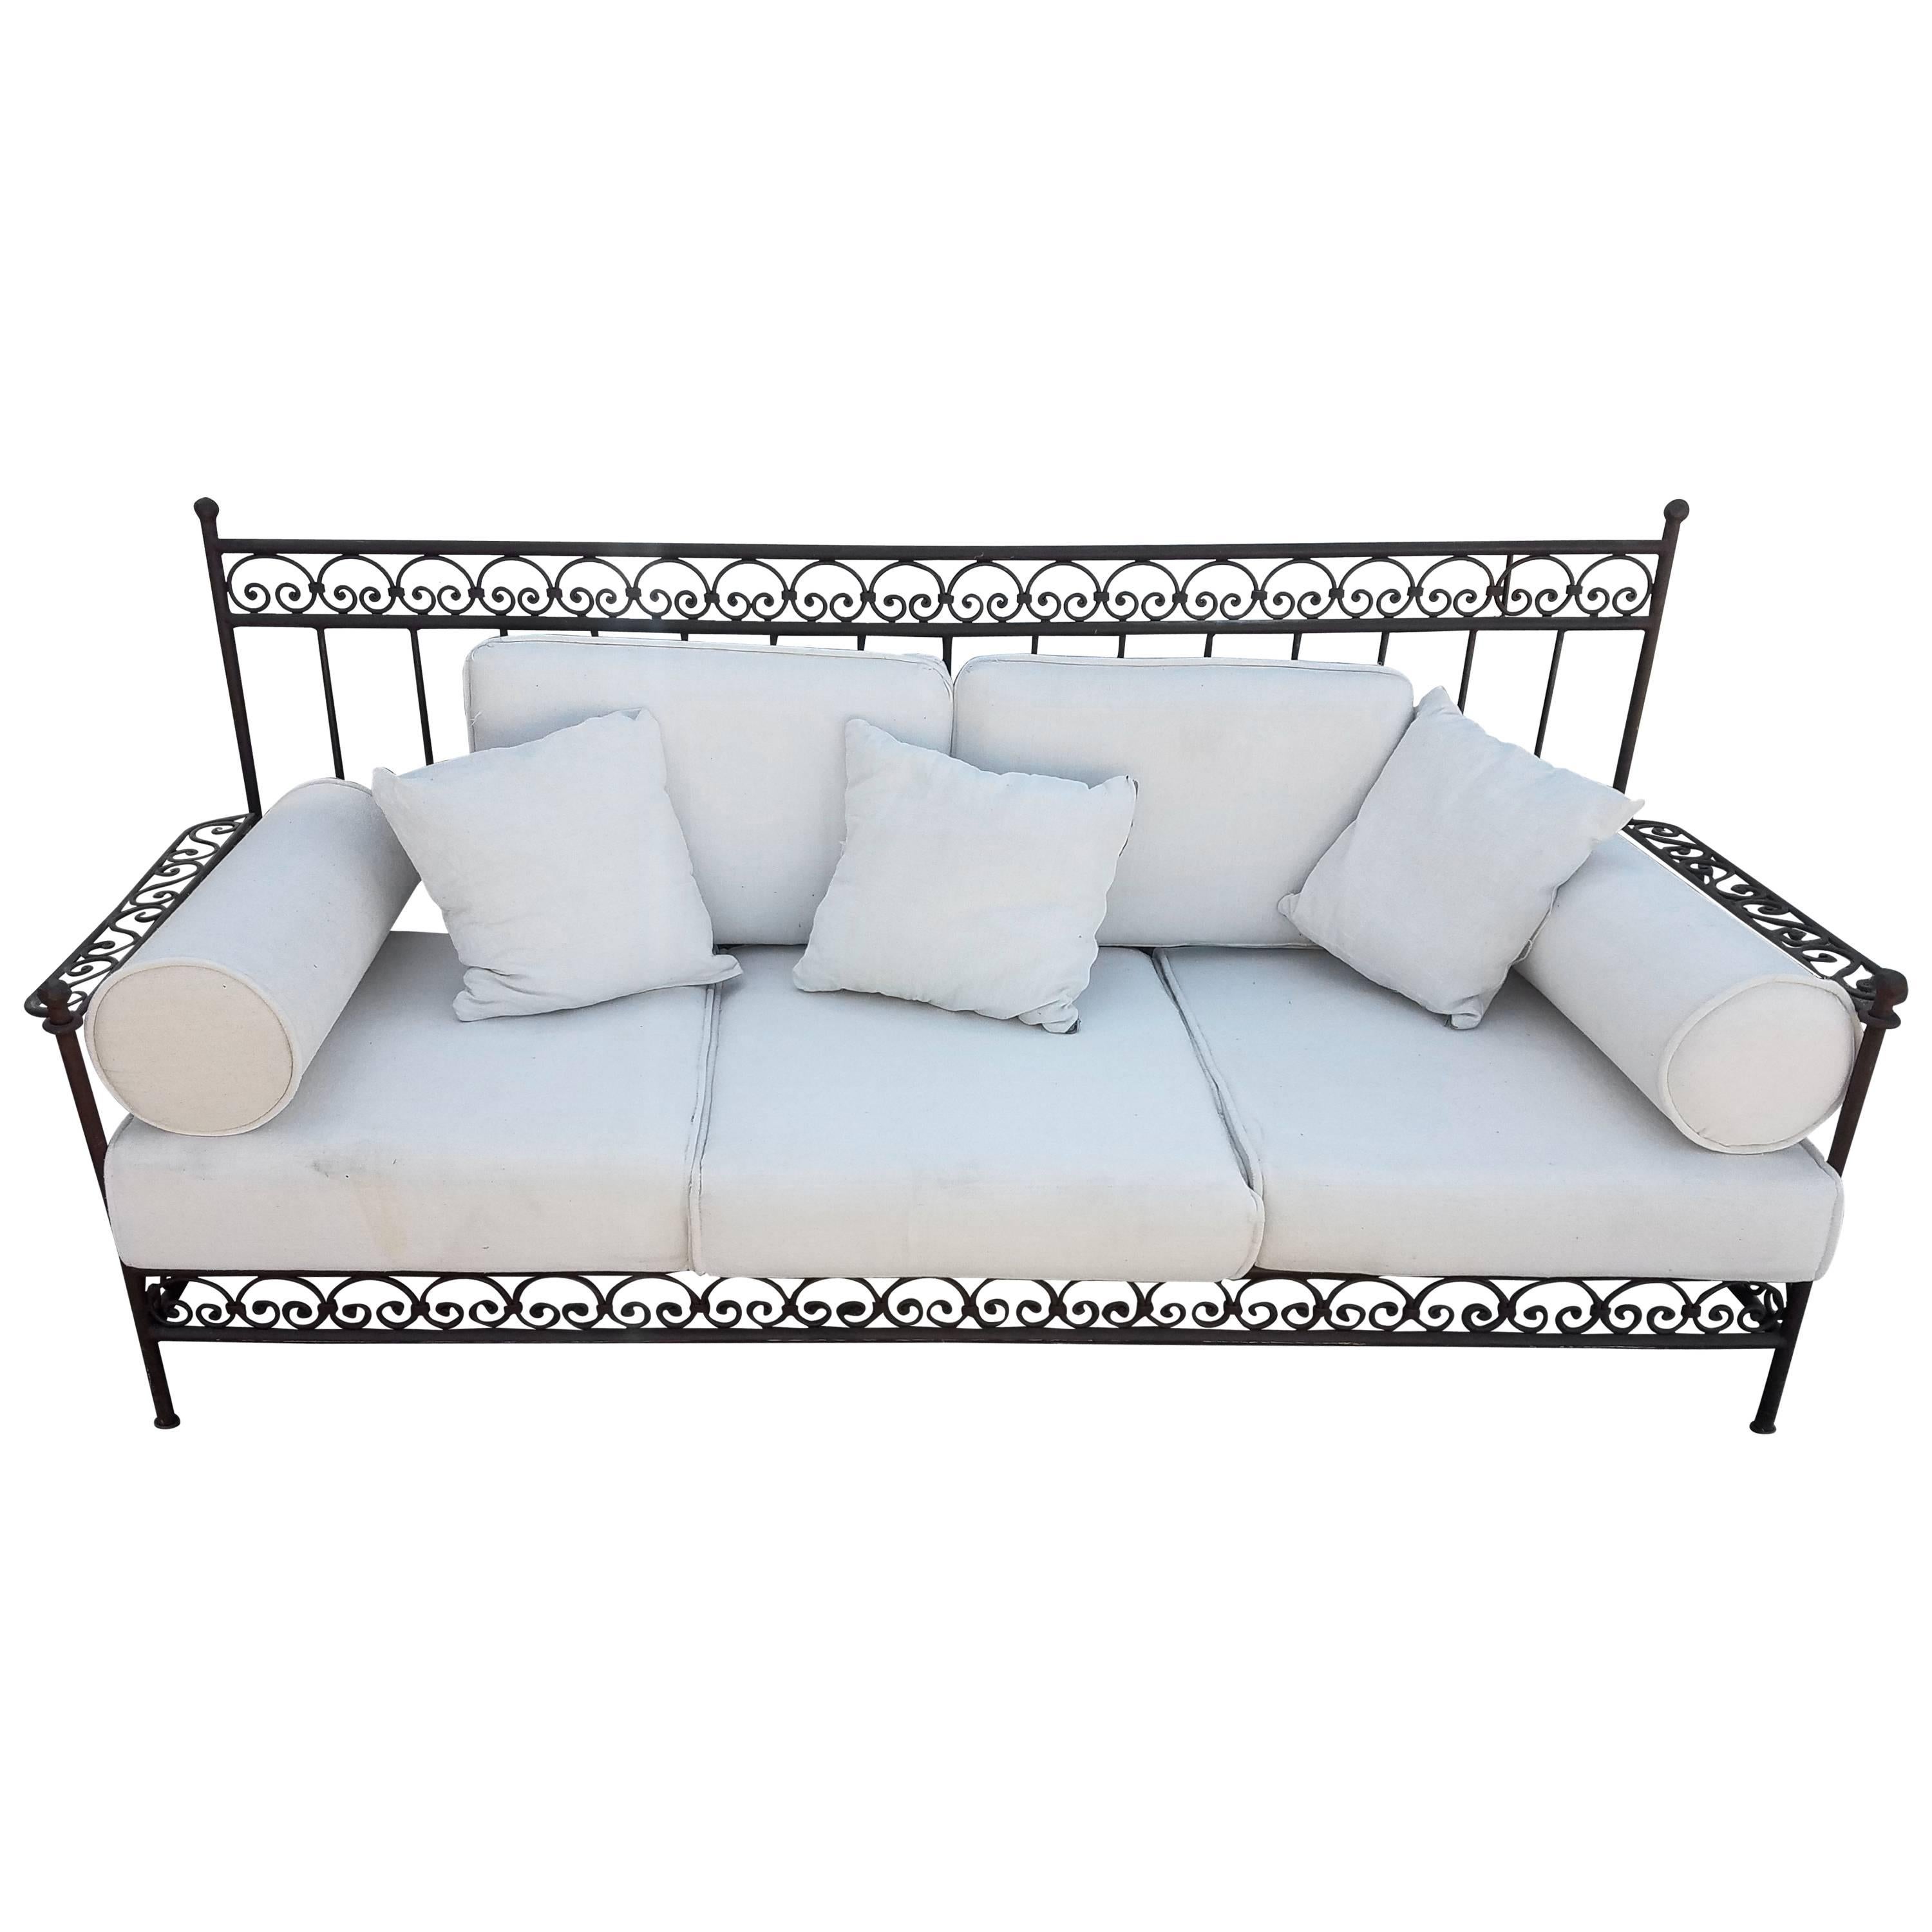 Moroccan Handmade Wrought Iron Bench, Three Seats For Sale